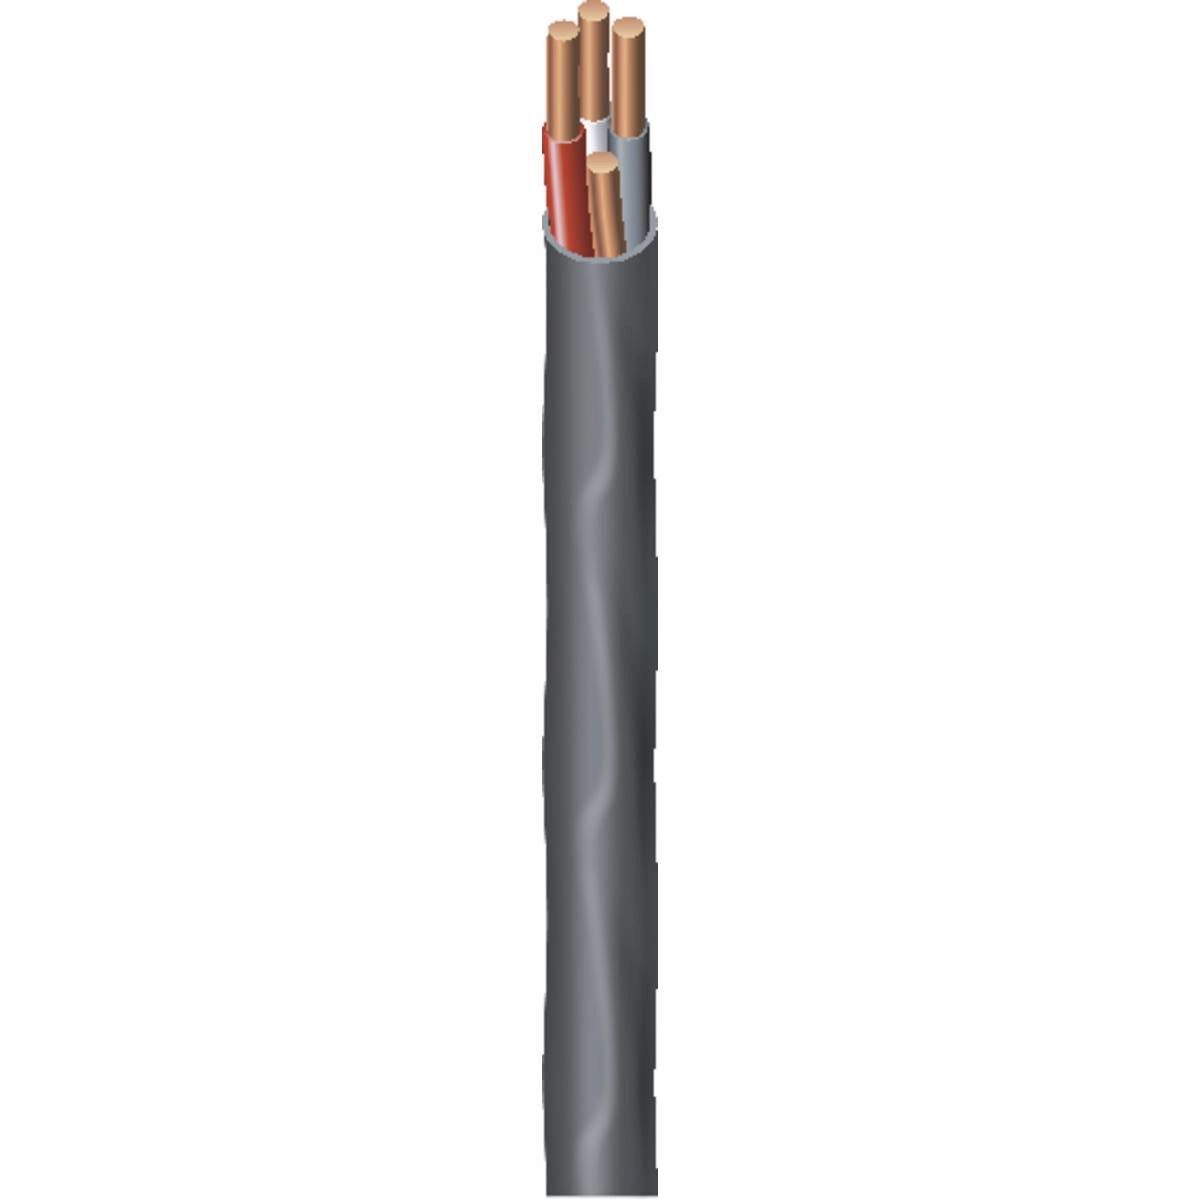 PER FOOT 4/3 Copper NM-B Romex with Ground Nonmetallic Sheathed Cable 600V 